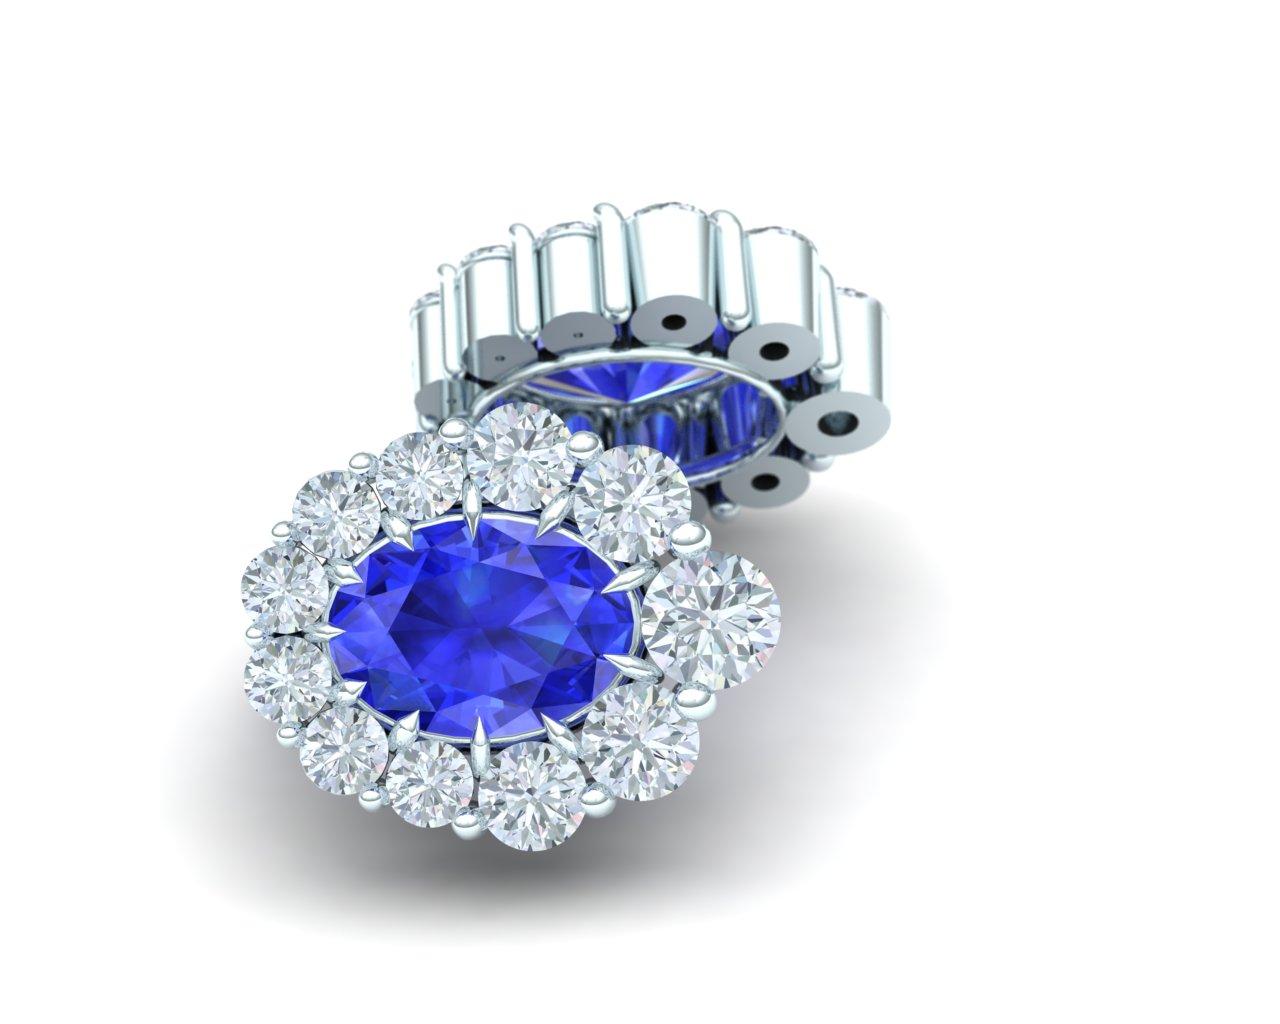 These classically inspired Sapphire and diamond earrings contain the following.  There are two Ceylon Blue oval cut sapphires that weigh between .60 carats and .70 carats each.  The Sapphires are complimented by over one carat of white round